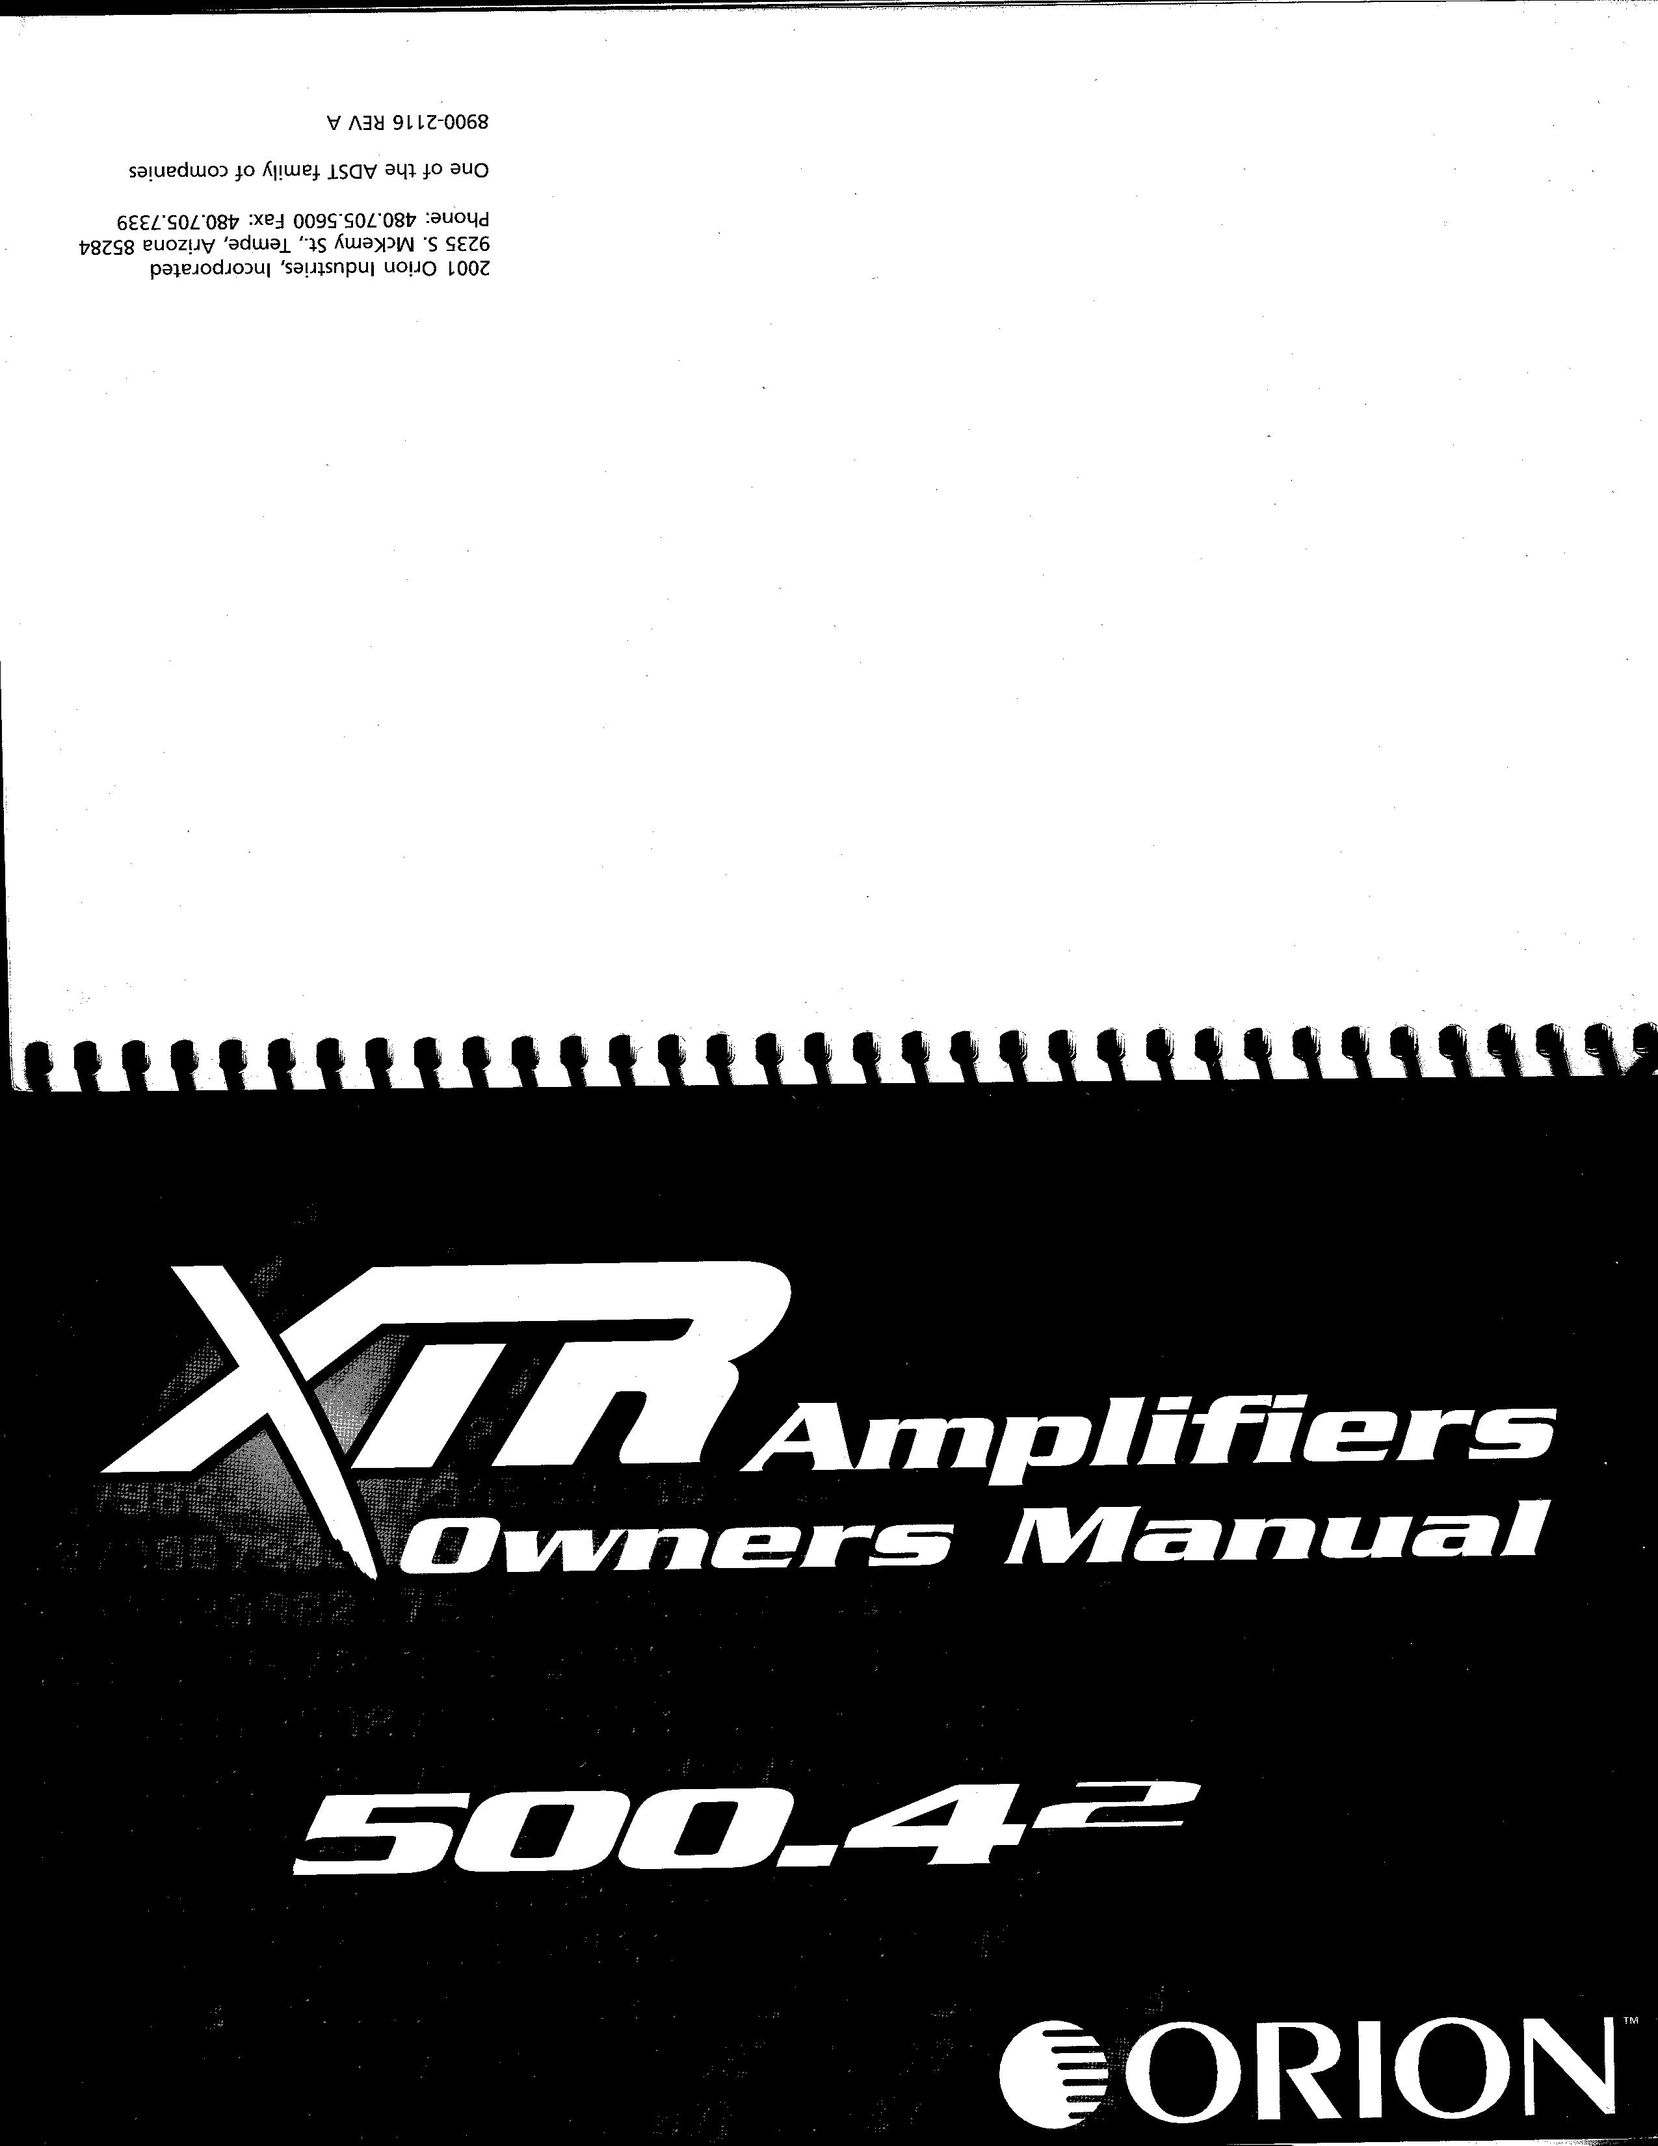 Orion Car Audio 500.42 Stereo Amplifier User Manual